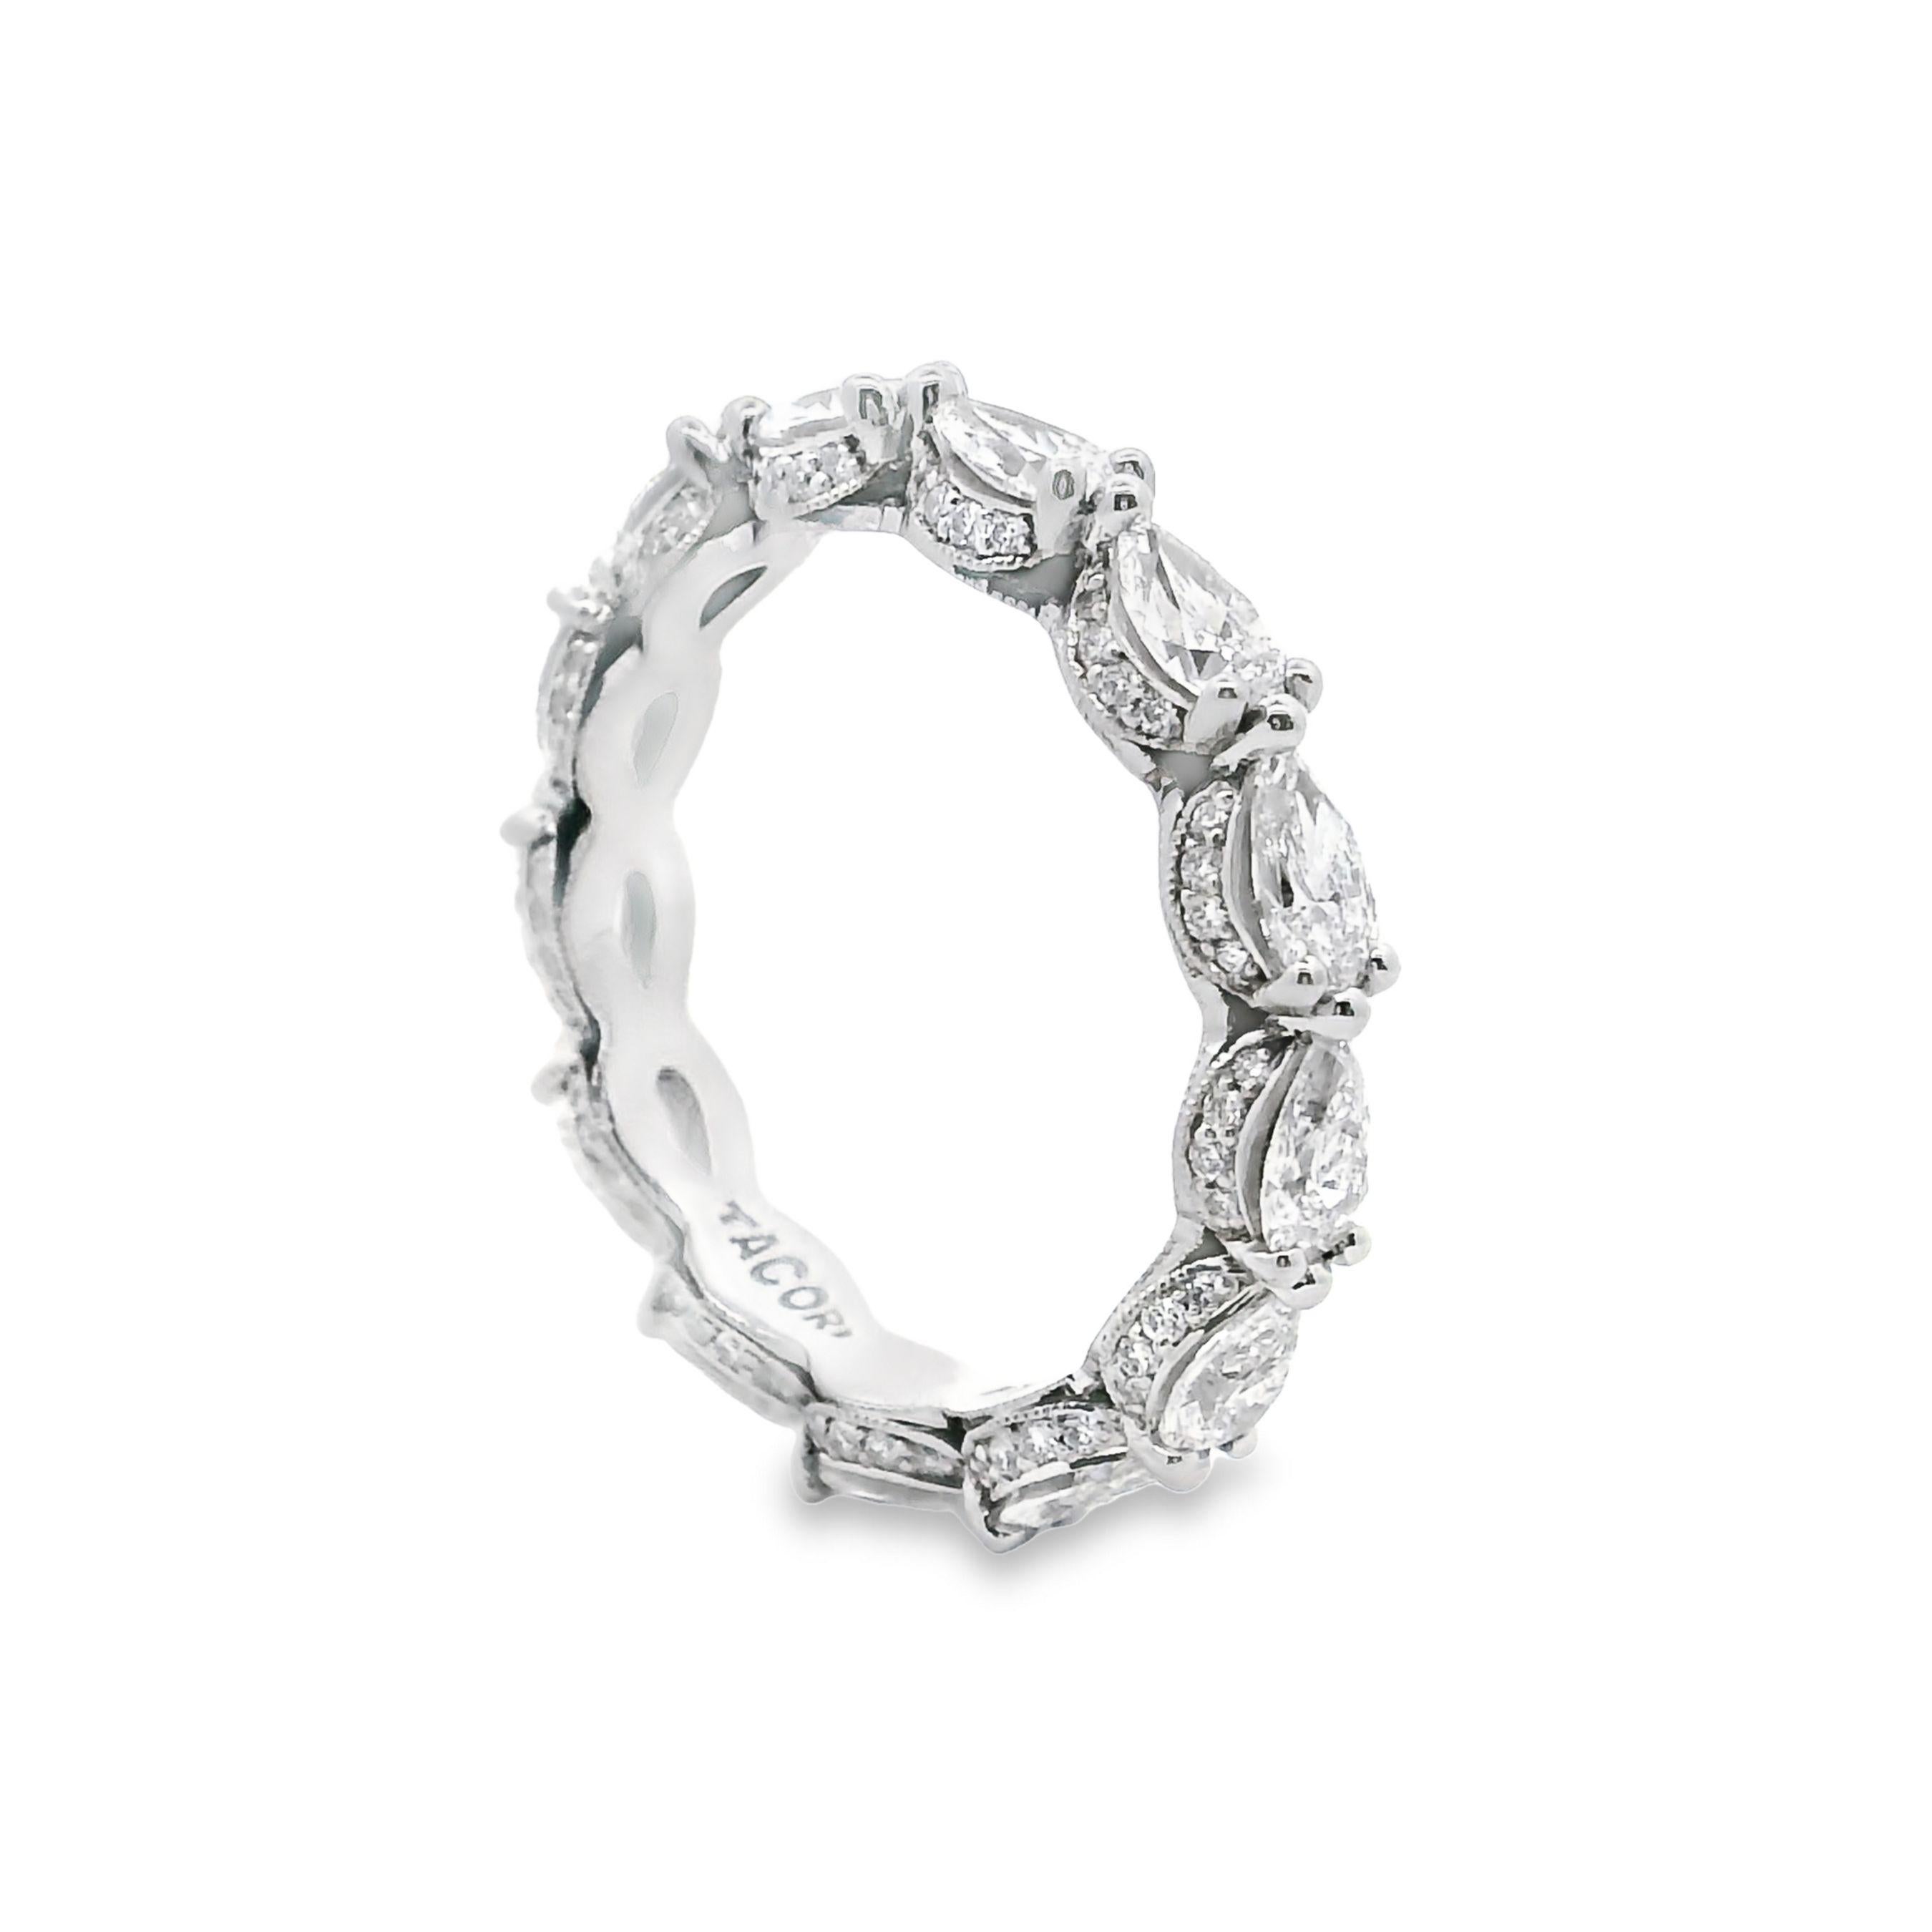 Tacori HT2642 platinum eternity band is part of the California designer's Royal T Collection.  This stunning band is hand engraved, has pear shaped diamonds all the way around, as well as smaller round diamonds throughout the ring.  Total diamond